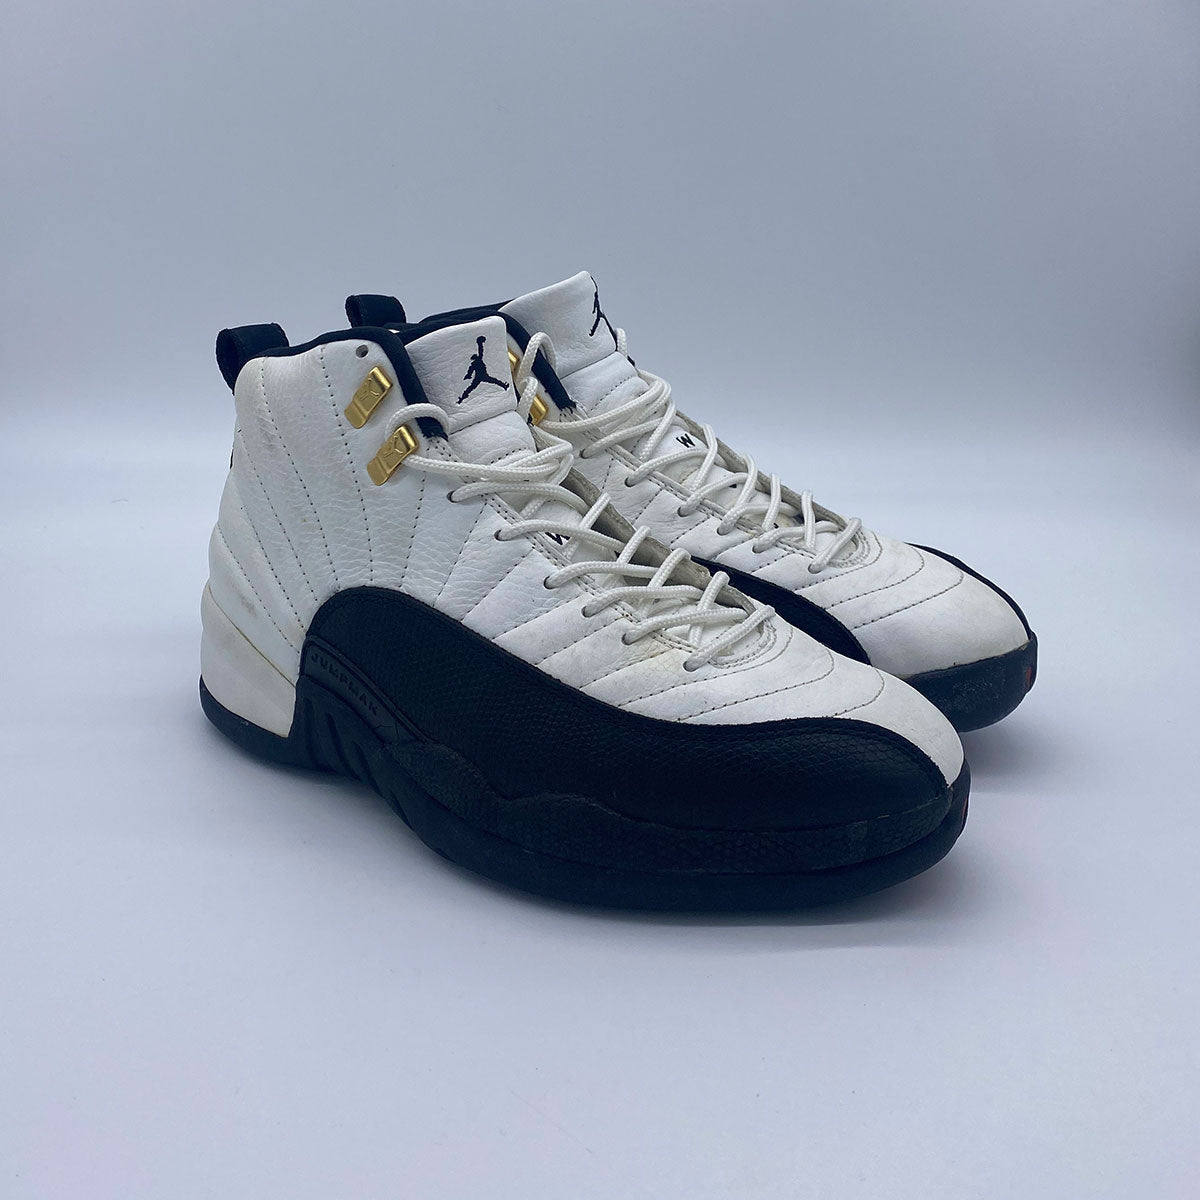 Air Jordan 12 XII OG Taxi 1996 Release size 9.5 VNDS (Pre-Owned) - KickzStore